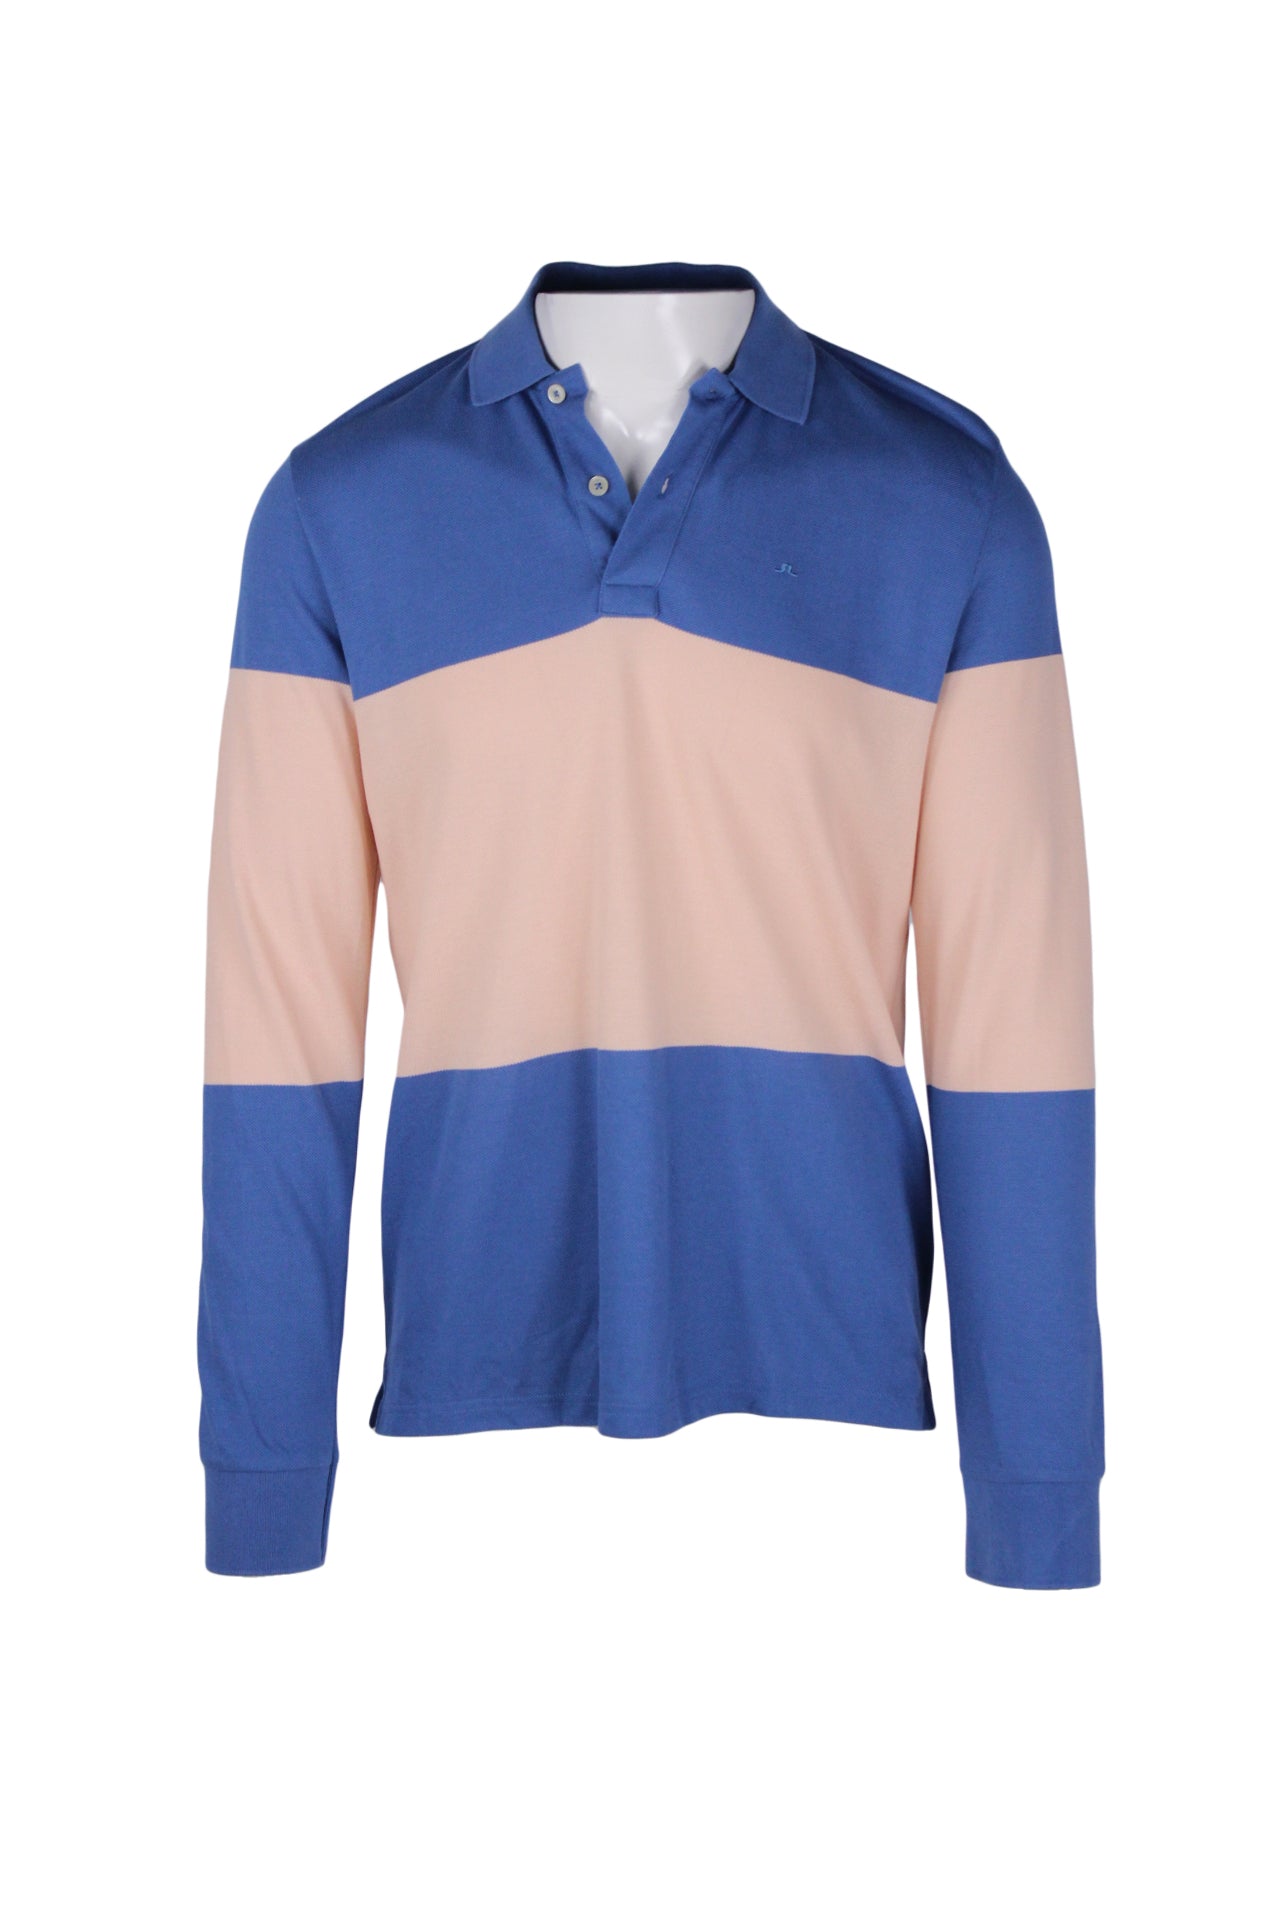 front view of j.lindeberg blue/mauve ‘luke pique’ long sleeve rugby shirt. features logo embroidered at left breast, mauve horizontal accent stripe across chest/back/sleeves, double button placket, and ribbed collar/cuffs.